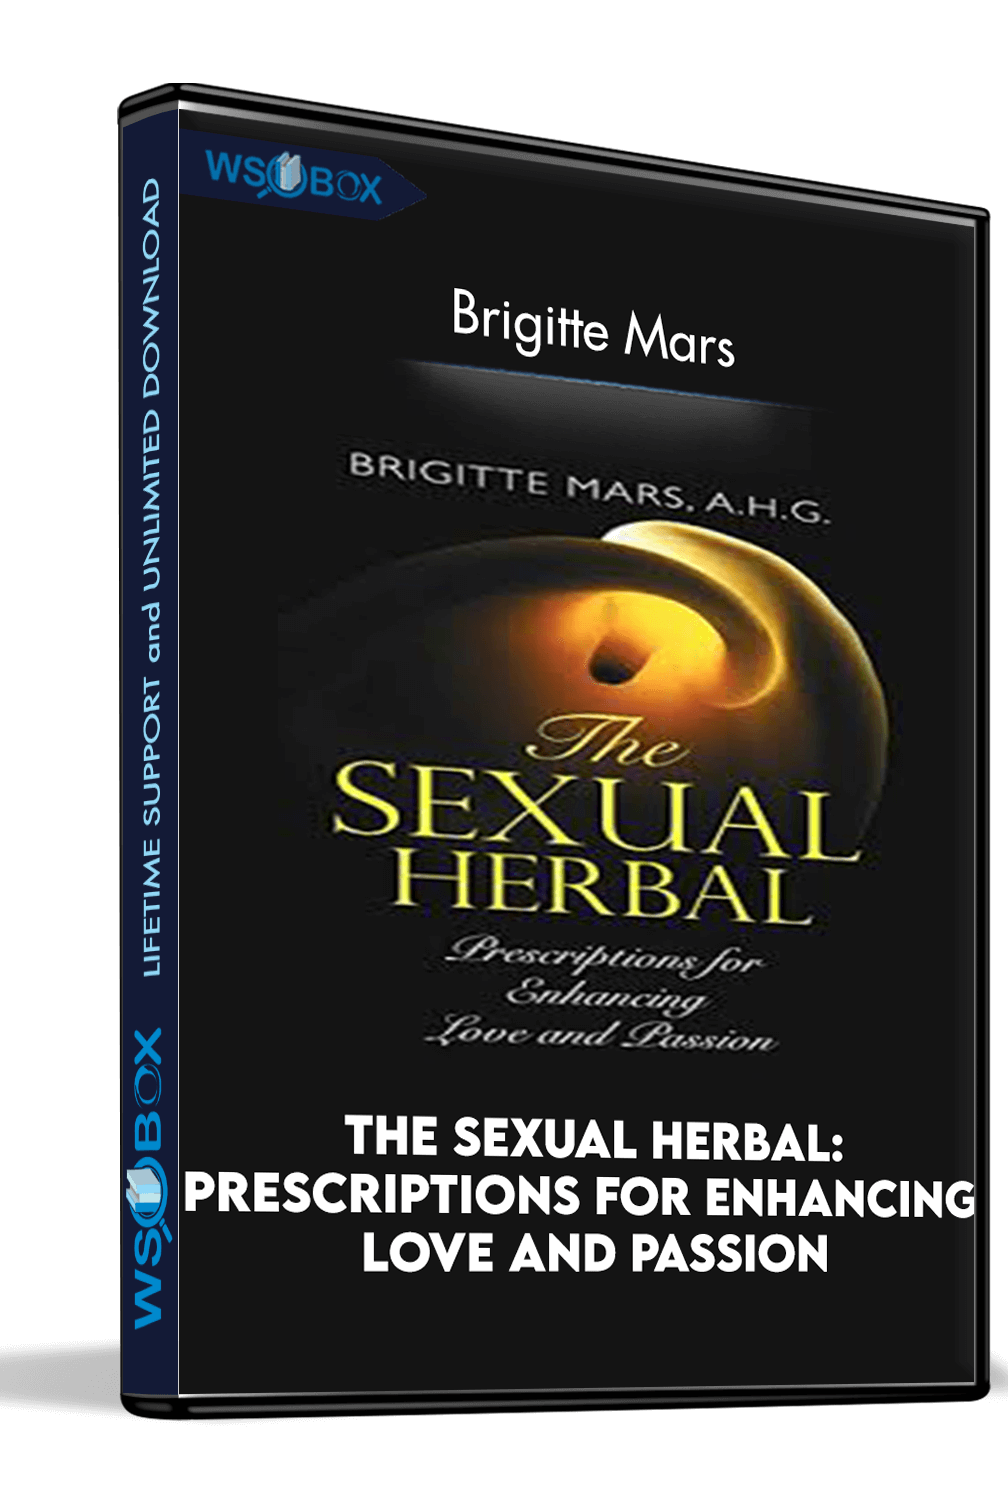 the-sexual-herbal-prescriptions-for-enhancing-love-and-passion-brigitte-mars